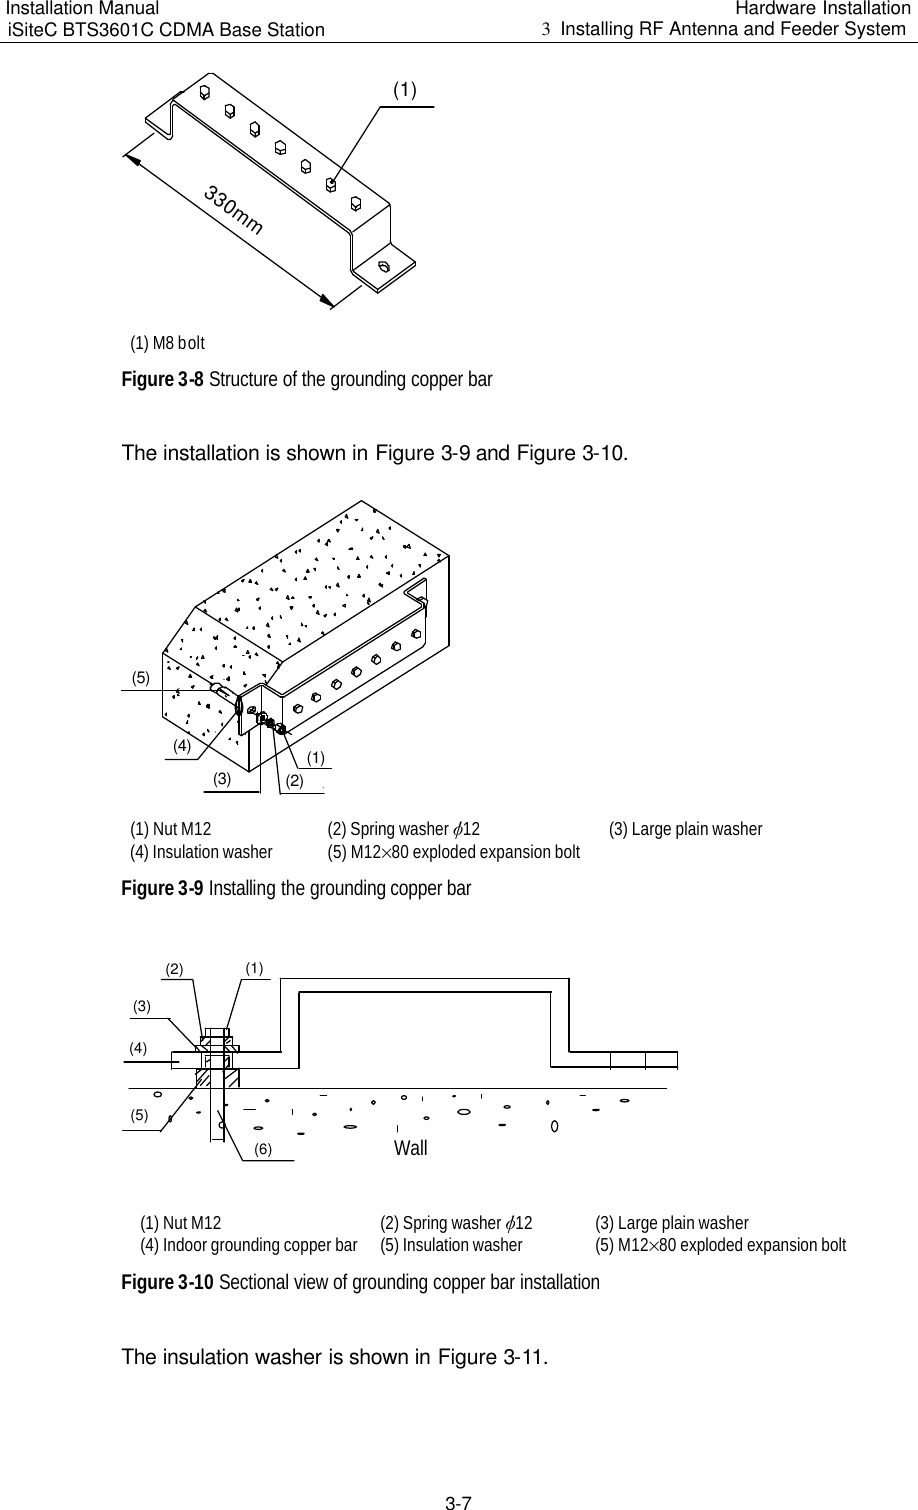 Installation Manual   iSiteC BTS3601C CDMA Base Station Hardware Installation 3  Installing RF Antenna and Feeder System  3-7 (1)330mm (1) M8 bolt Figure 3-8 Structure of the grounding copper bar　The installation is shown in Figure 3-9 and Figure 3-10. (1)(2)(3)(4)(5) (1) Nut M12 (2) Spring washer v12 (3) Large plain washer (4) Insulation washer (5) M12%80 exploded expansion bolt Figure 3-9 Installing the grounding copper bar (1)(2)(3)(4)(5)(6) Wall (1) Nut M12 (2) Spring washer v12 (3) Large plain washer (4) Indoor grounding copper bar (5) Insulation washer (5) M12%80 exploded expansion bolt  Figure 3-10 Sectional view of grounding copper bar installation The insulation washer is shown in Figure 3-11. 